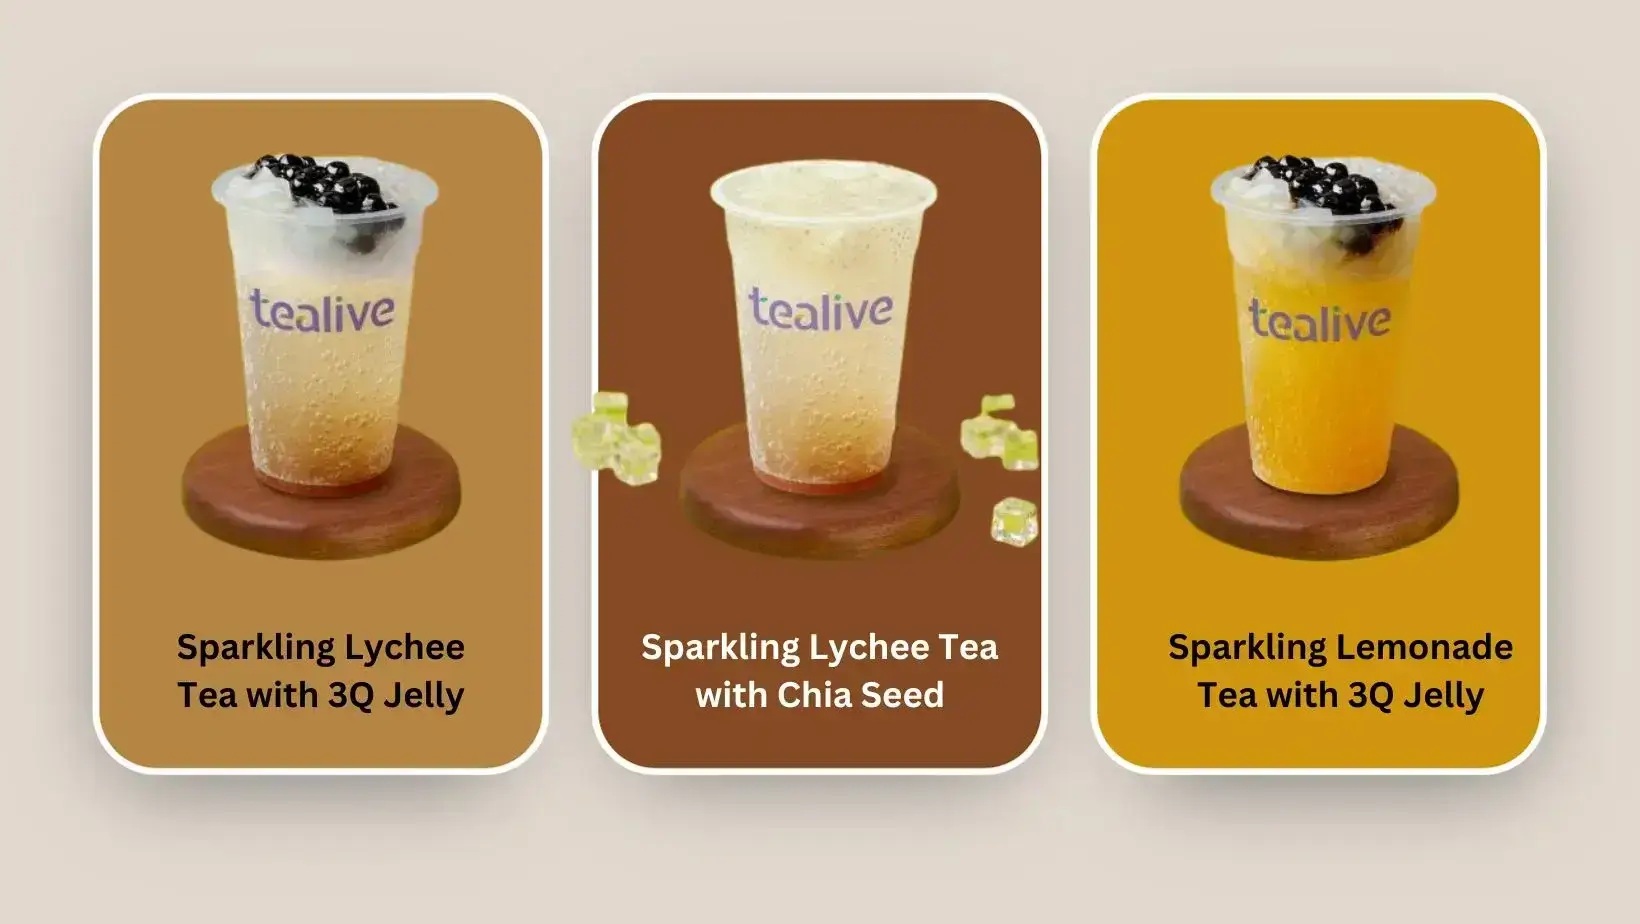 Sparkling Lychee Tea with 3Q Jelly Sparkling Lemonade Tea with 3Q Jelly Sparkling Lychee Tea with Chia Seed